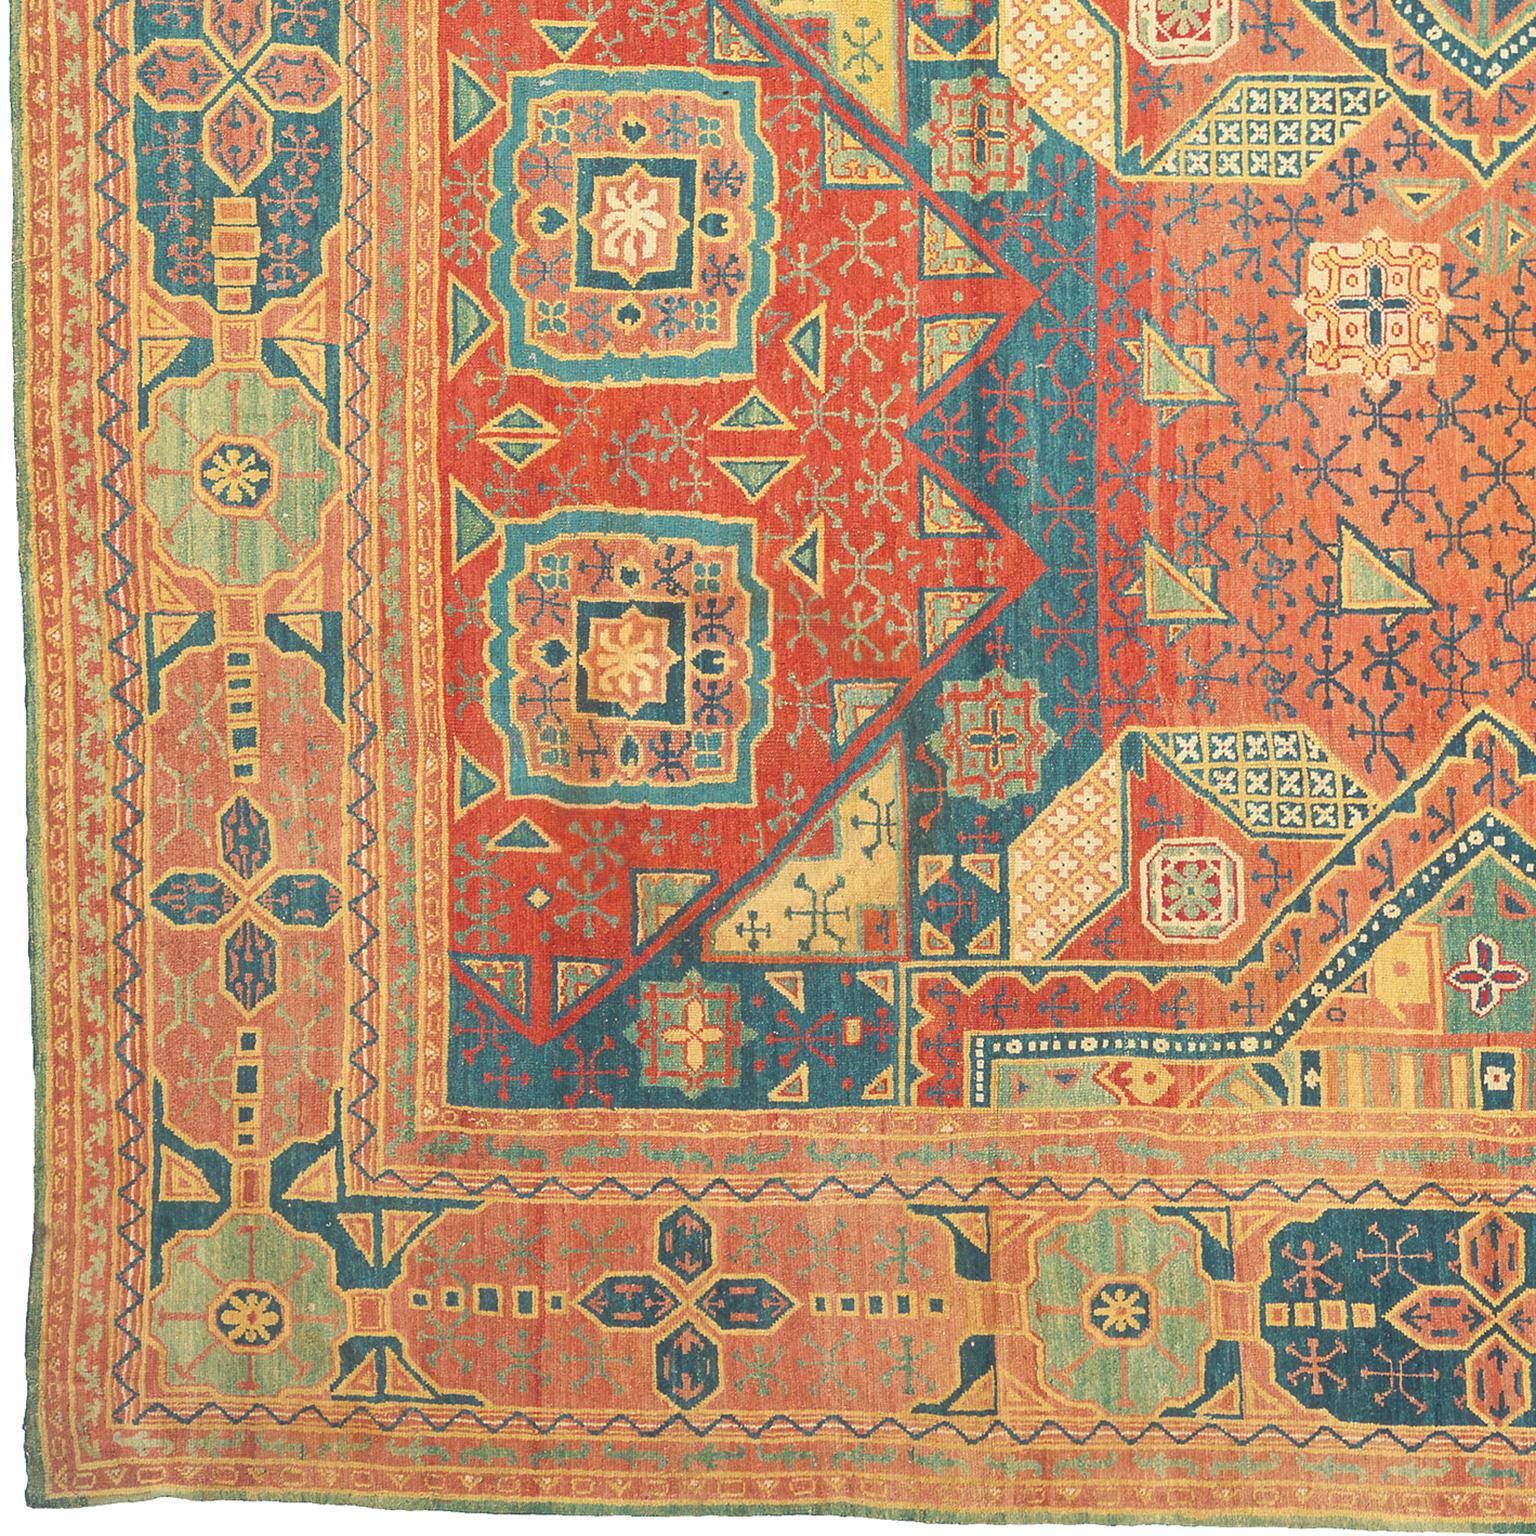 Antique Pile Aubusson rug
France, circa 1746-1762
Provenance: William & Babe Paley.
handwoven